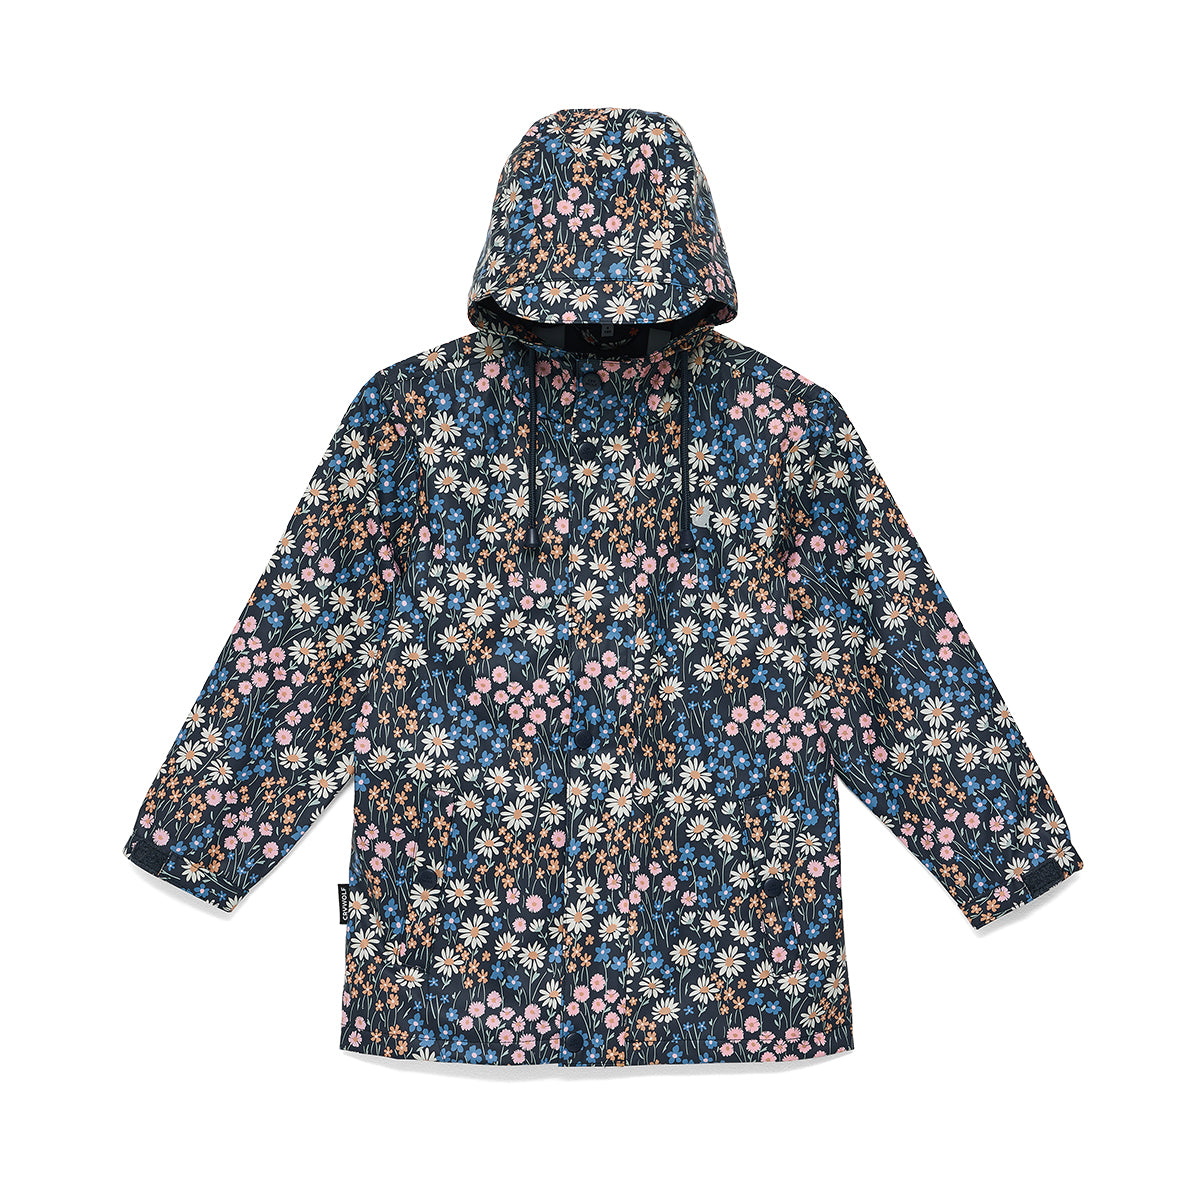 Play Jacket || Winter Floral